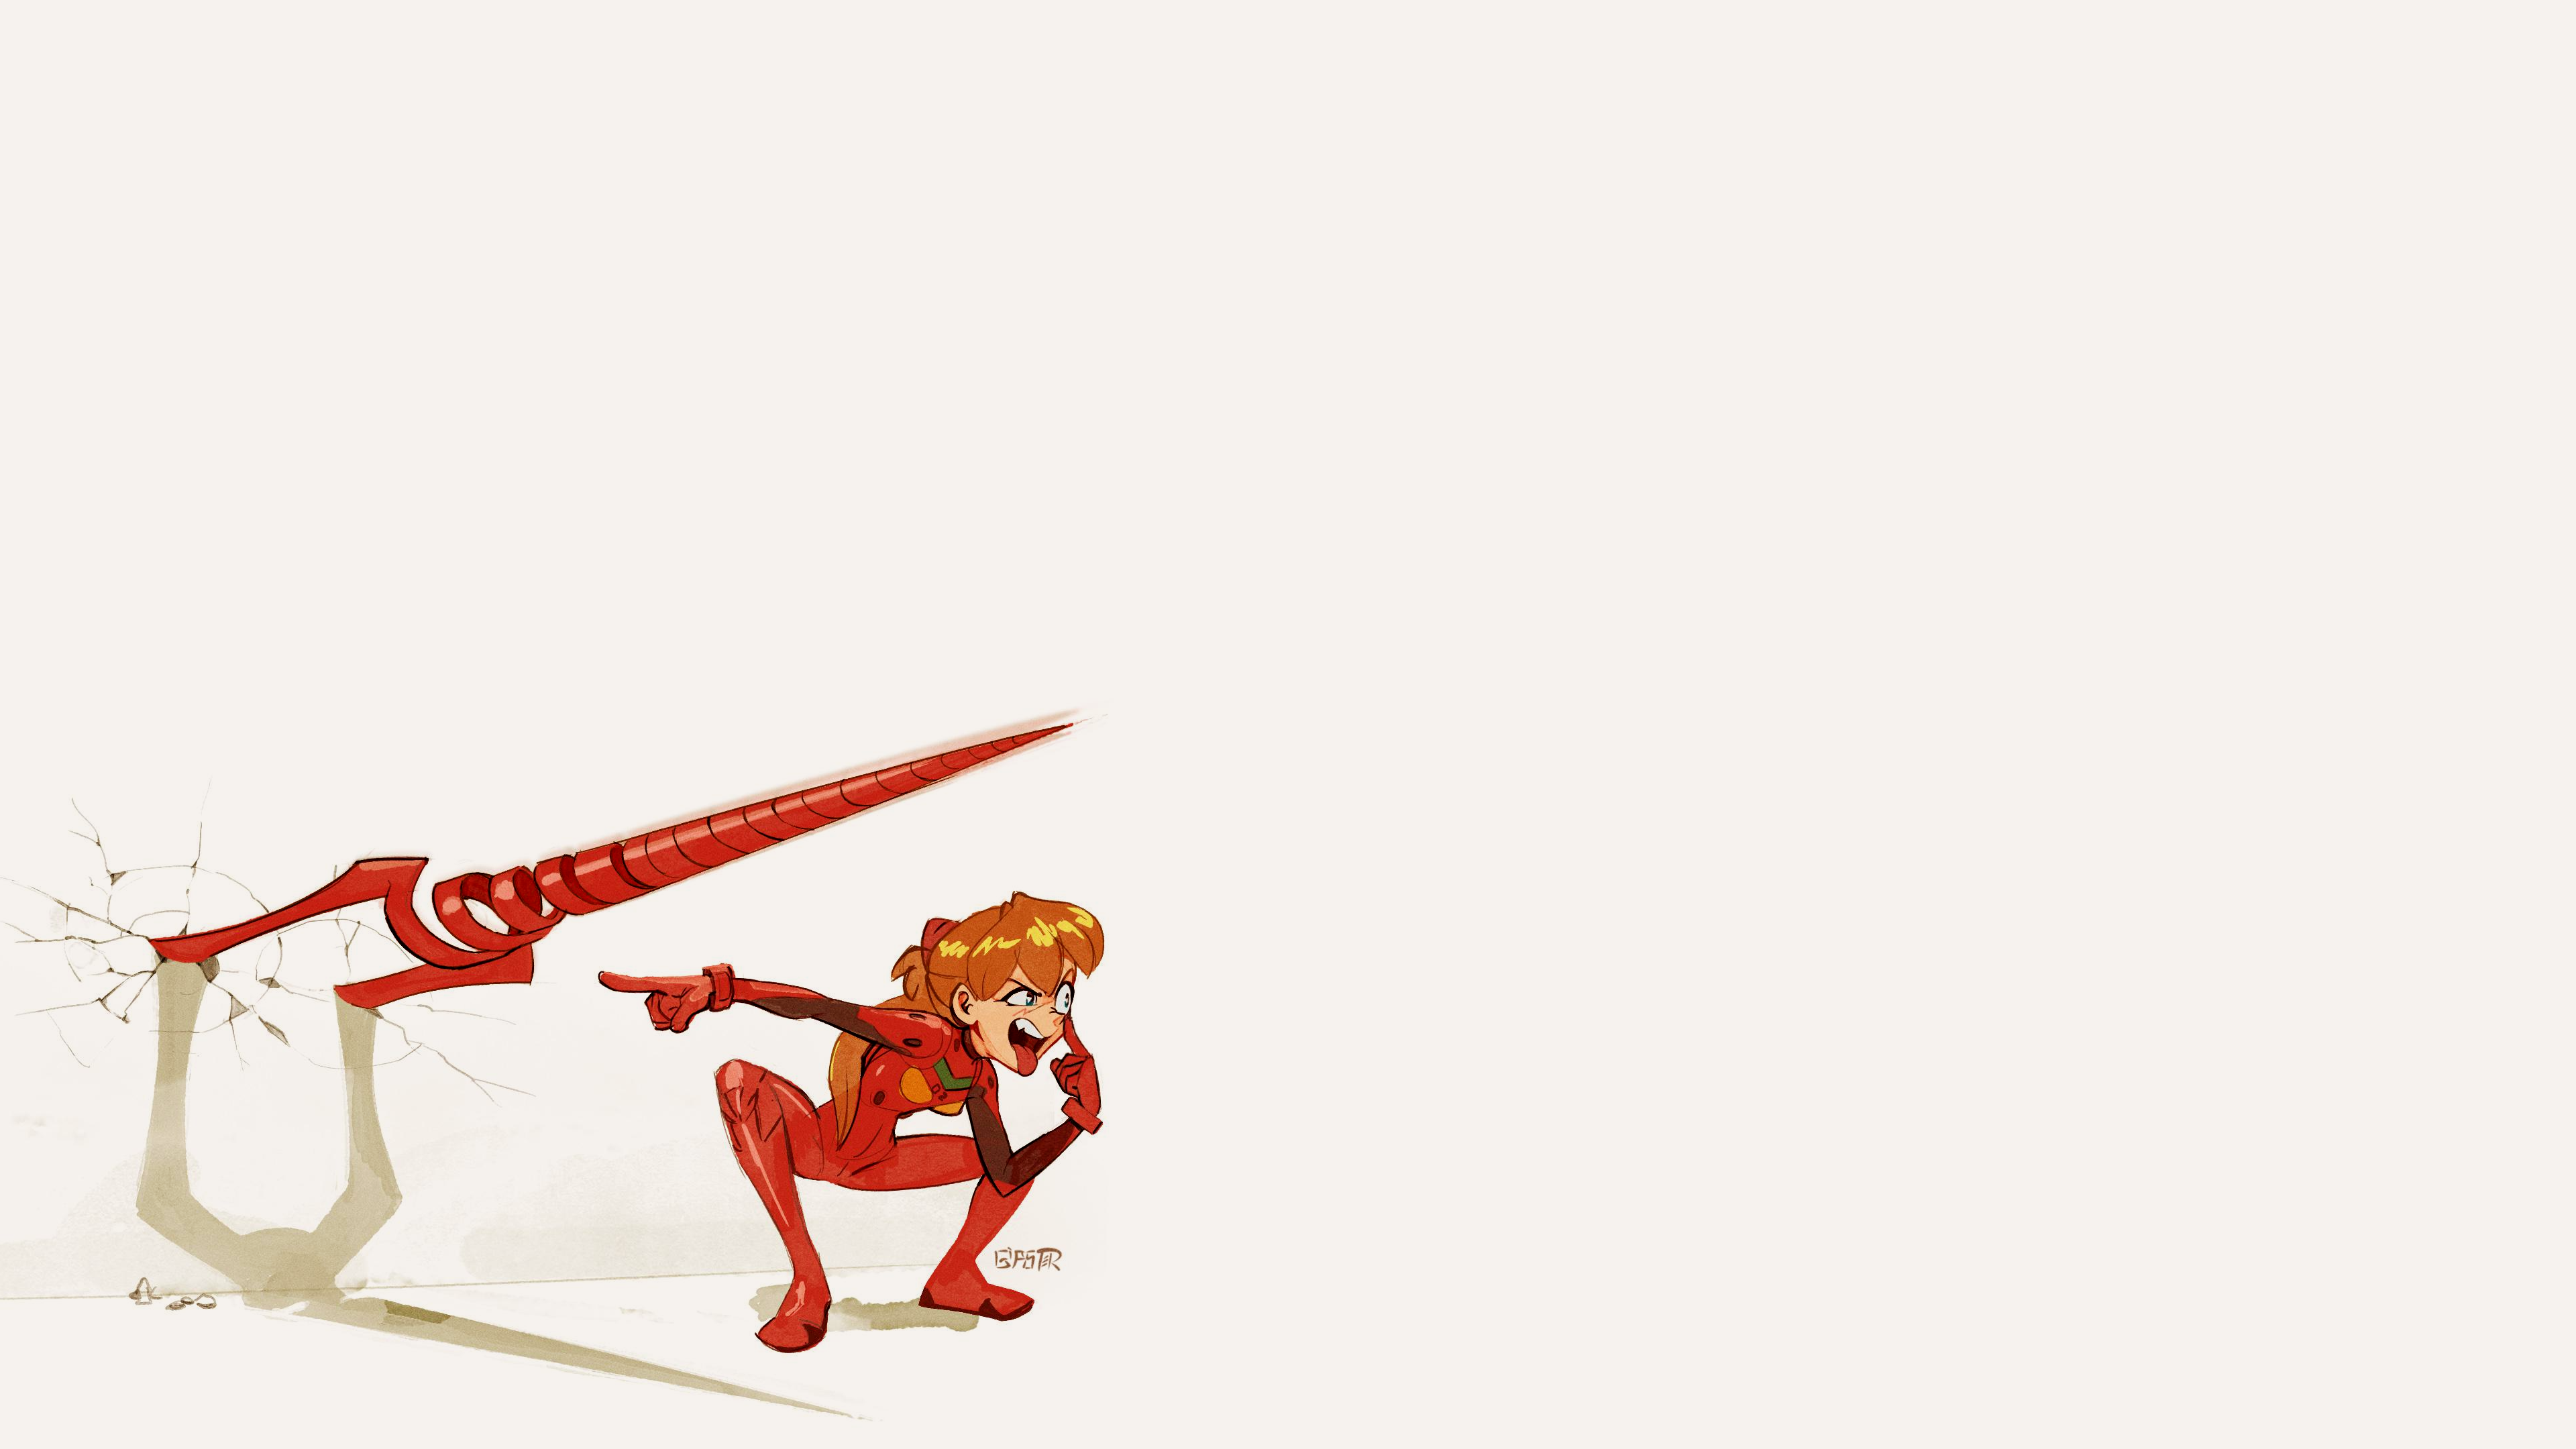 Anime 3840x2160 Asuka Langley Soryu Neon Genesis Evangelion redhead blue eyes obscene red bodysuit plugsuit lance Spear of Longinus spear gloves red gloves tongue out tongues smug face long hair bangs finger pointing shadow anime girls squatting rubble teeth white background simple background minimalism bodysuit